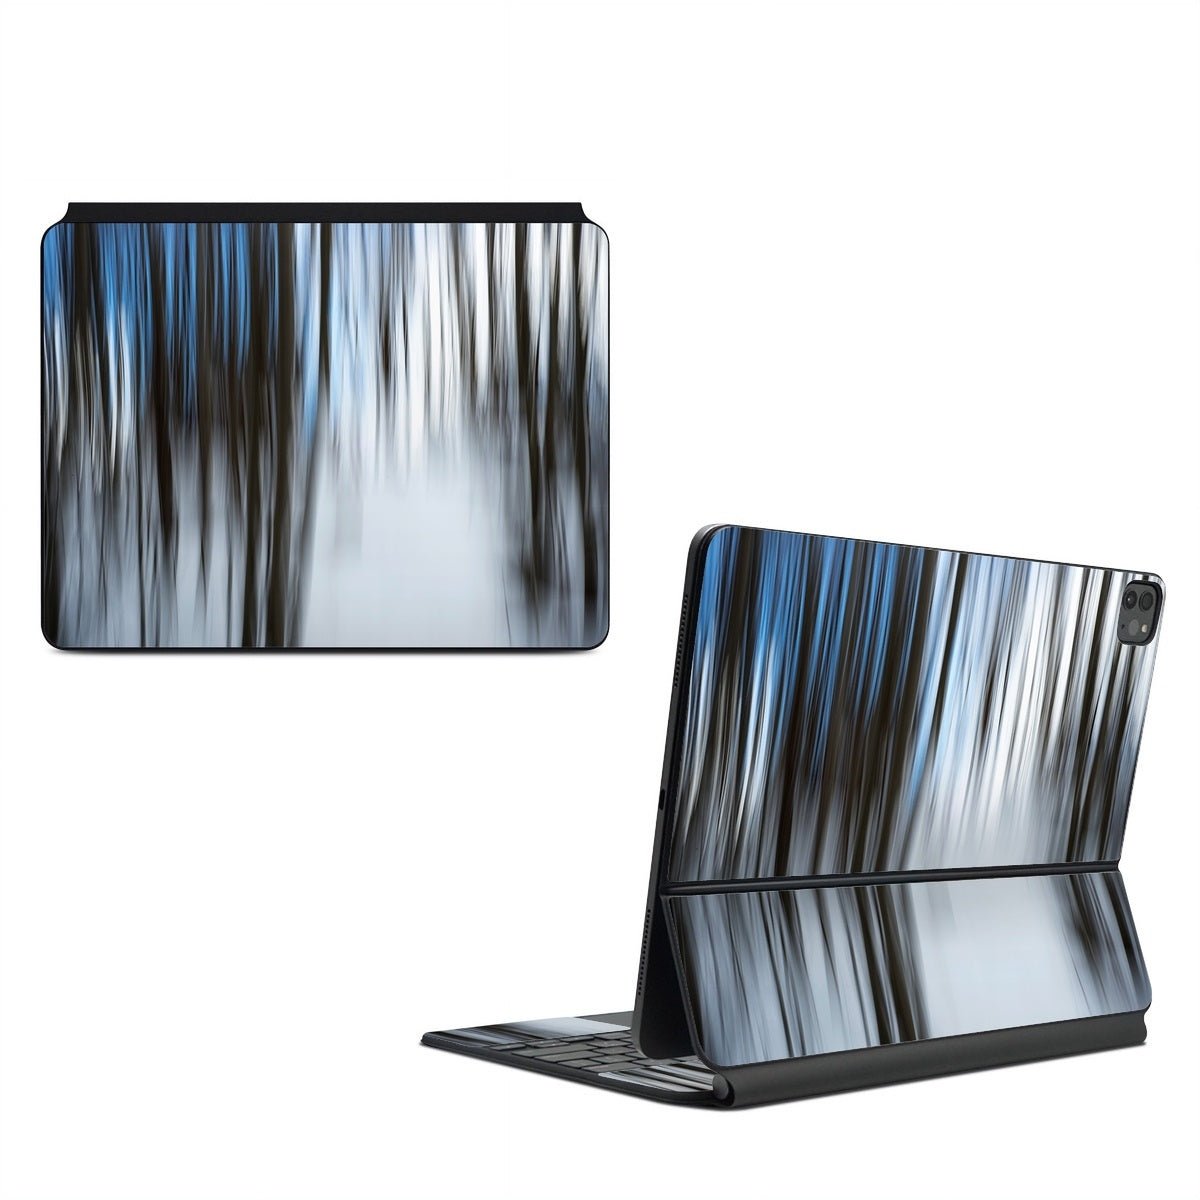 Abstract Forest - Apple Magic Keyboard for iPad Skin - Andreas Stridsberg - DecalGirl